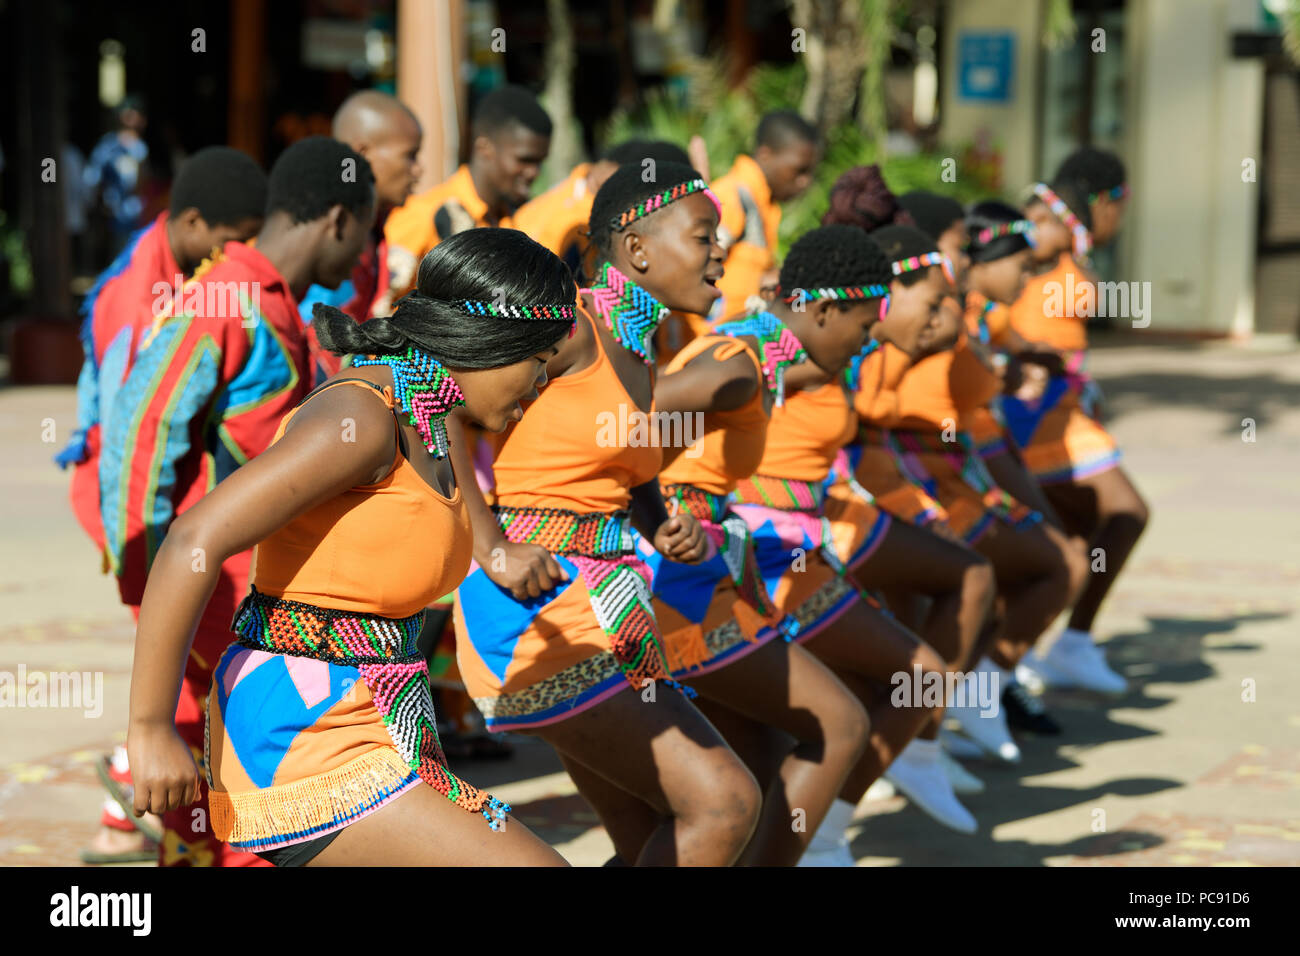 Young Zulu men and women in colourful cultural dress dancing and singing at open air performance, Durban, South Africa Stock Photo